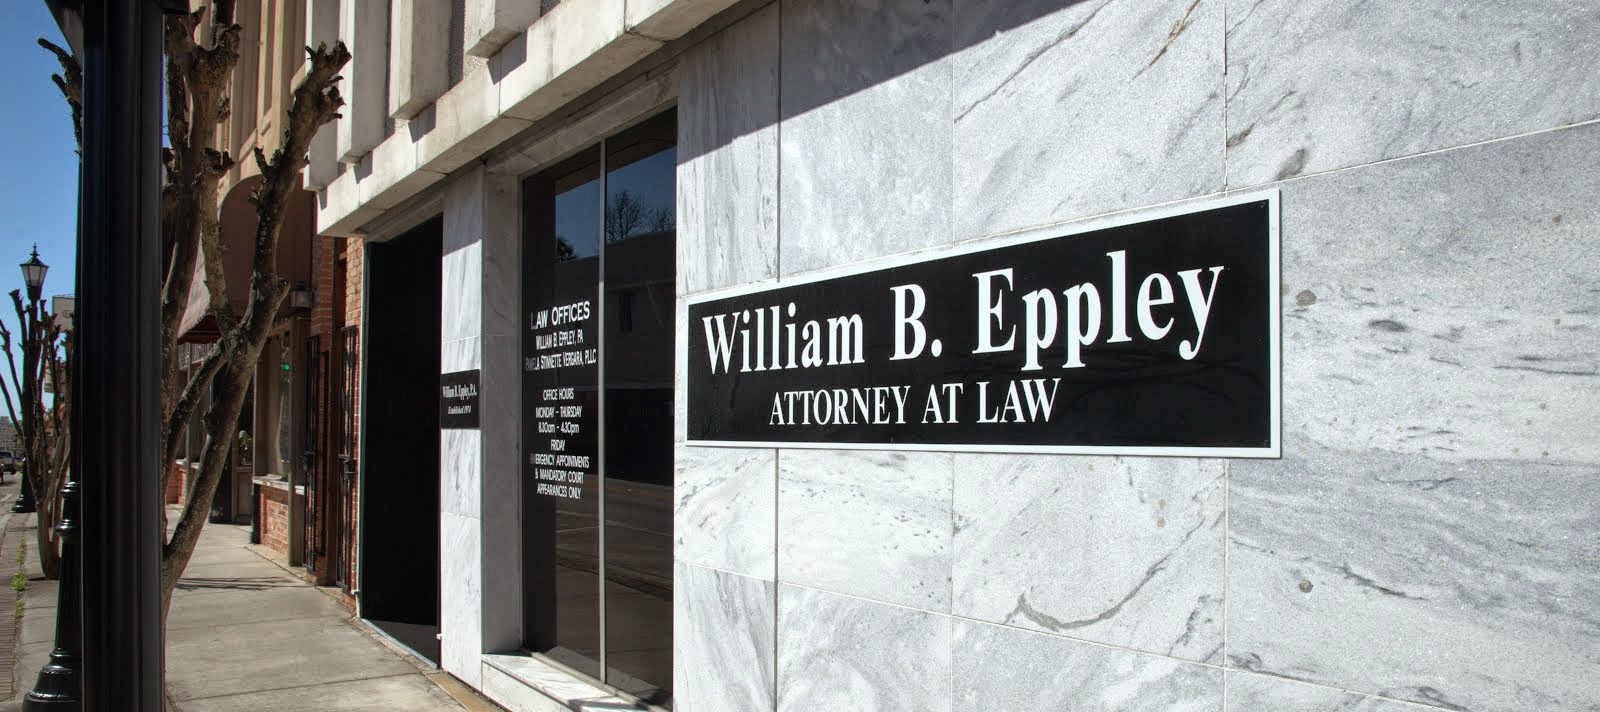 Law Offices of William B. Eppley, P.A.